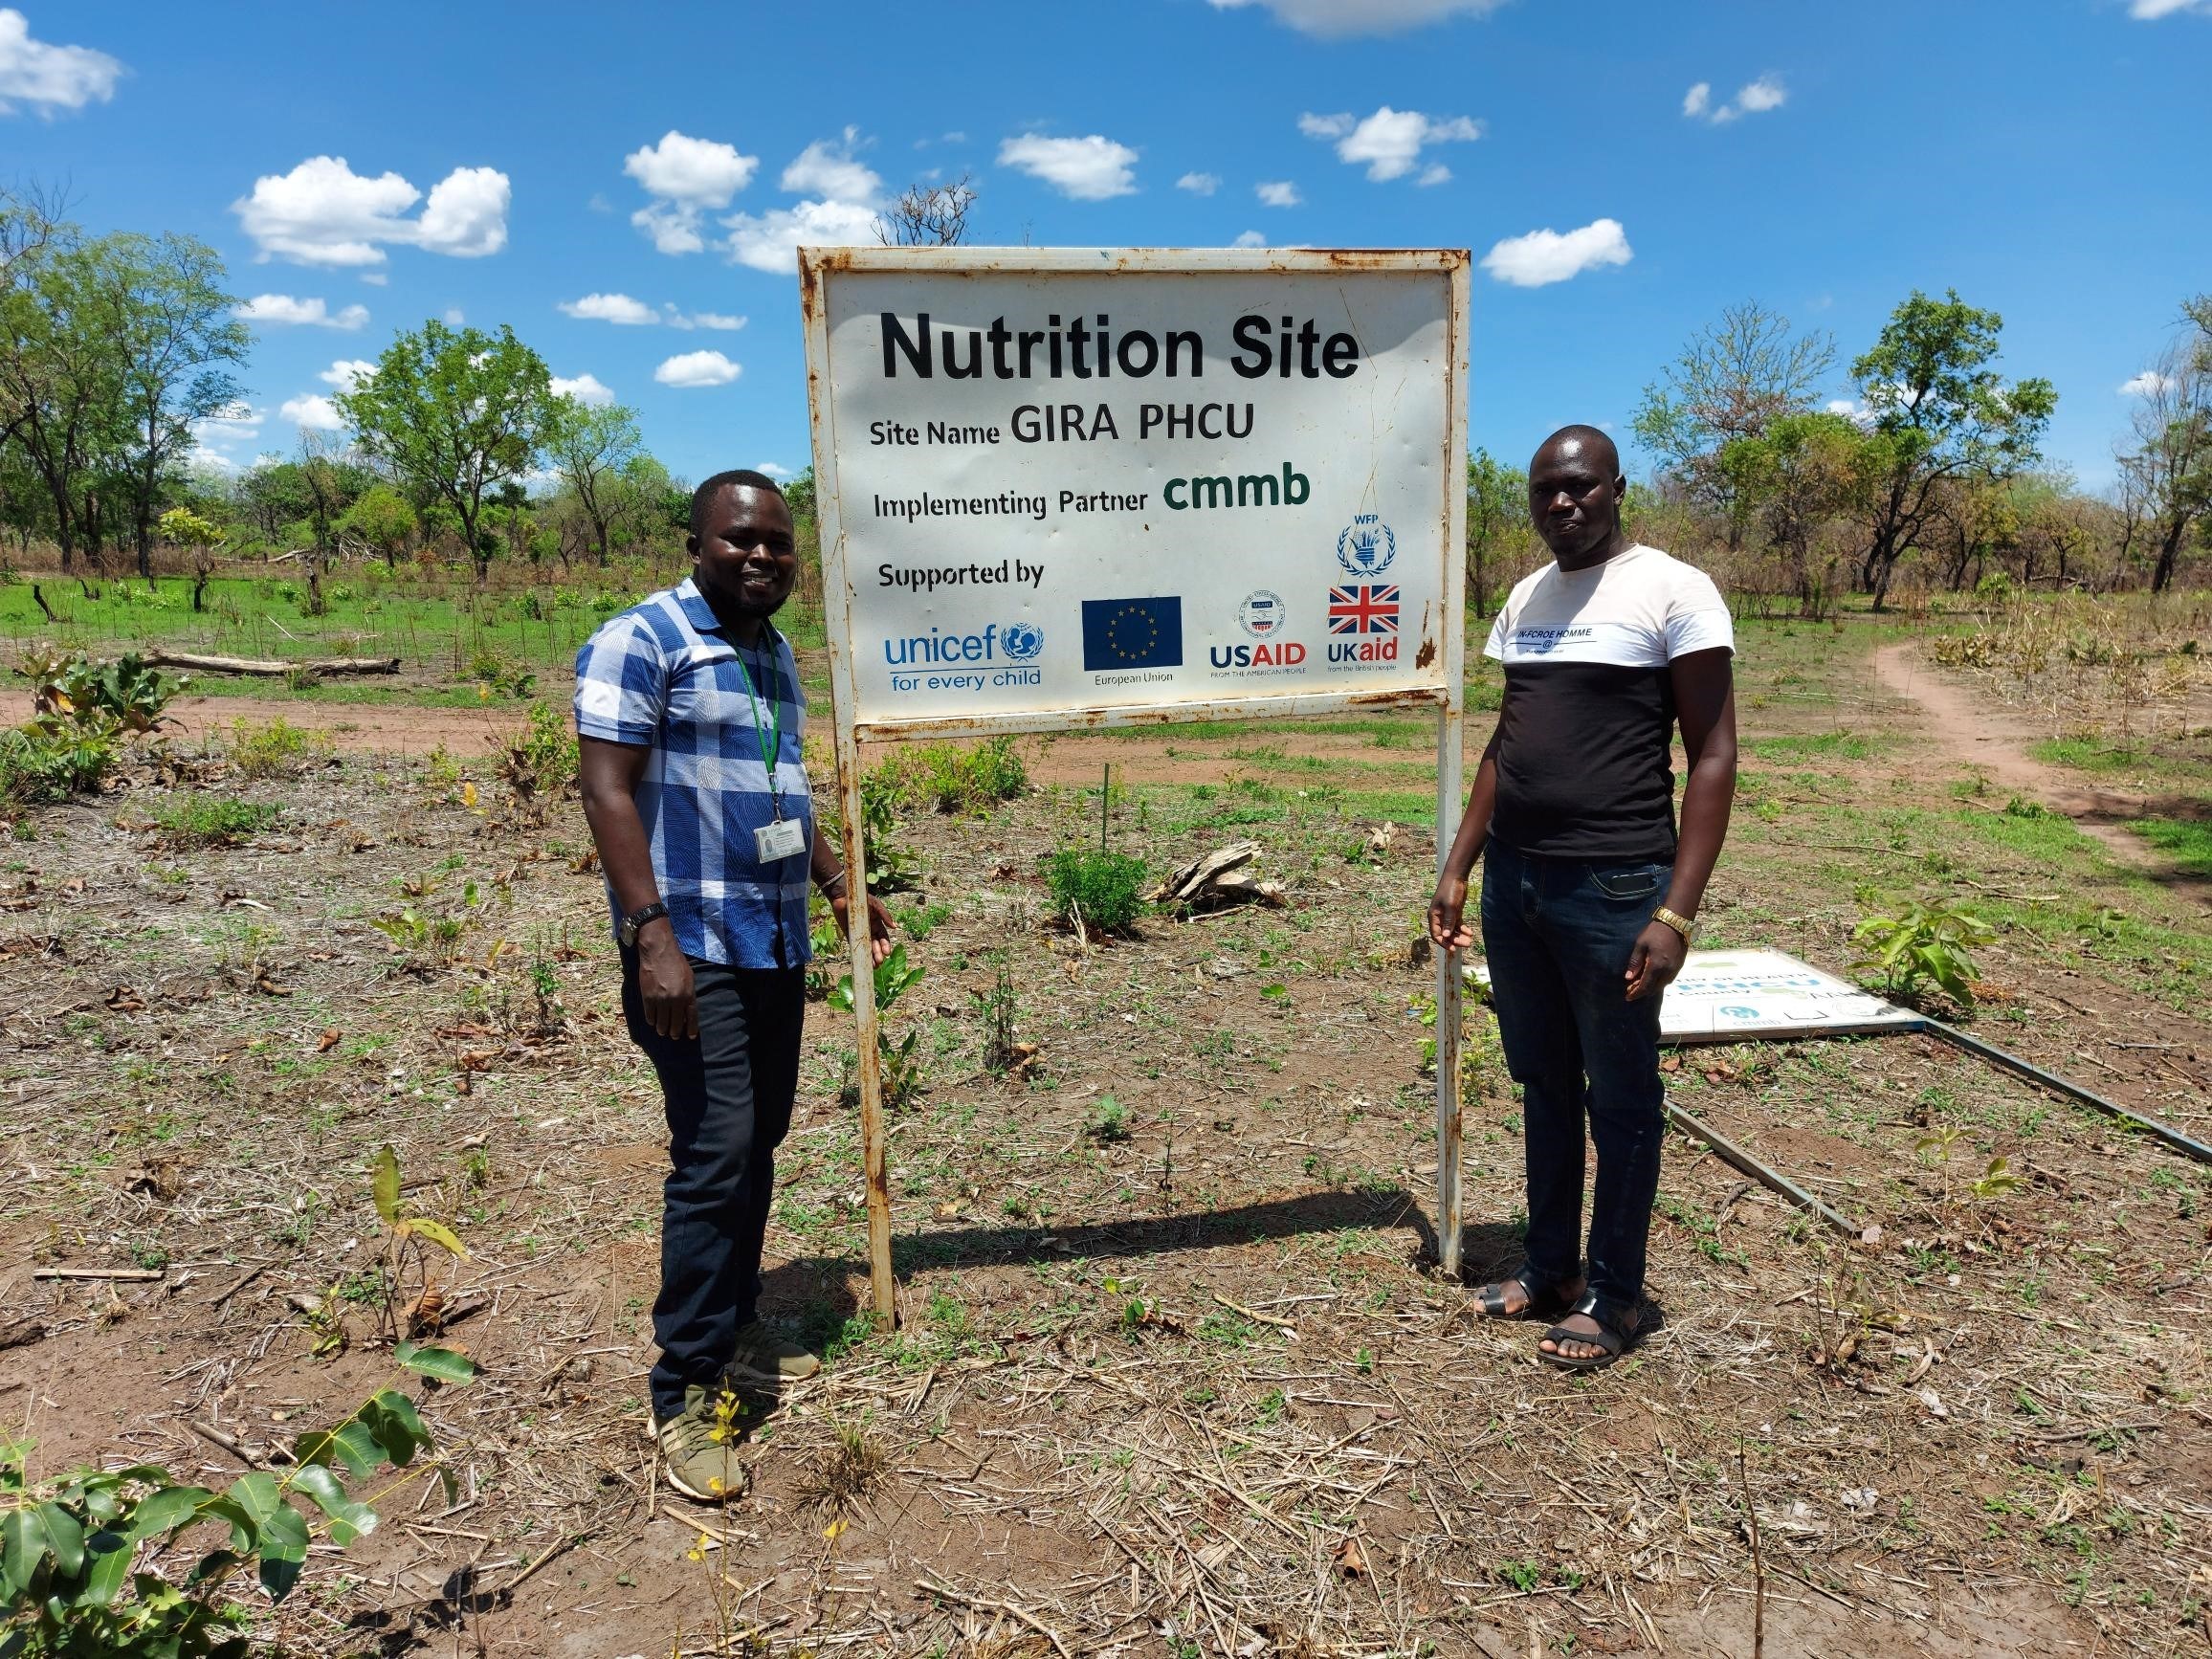 william and colleague in front of nutrition site